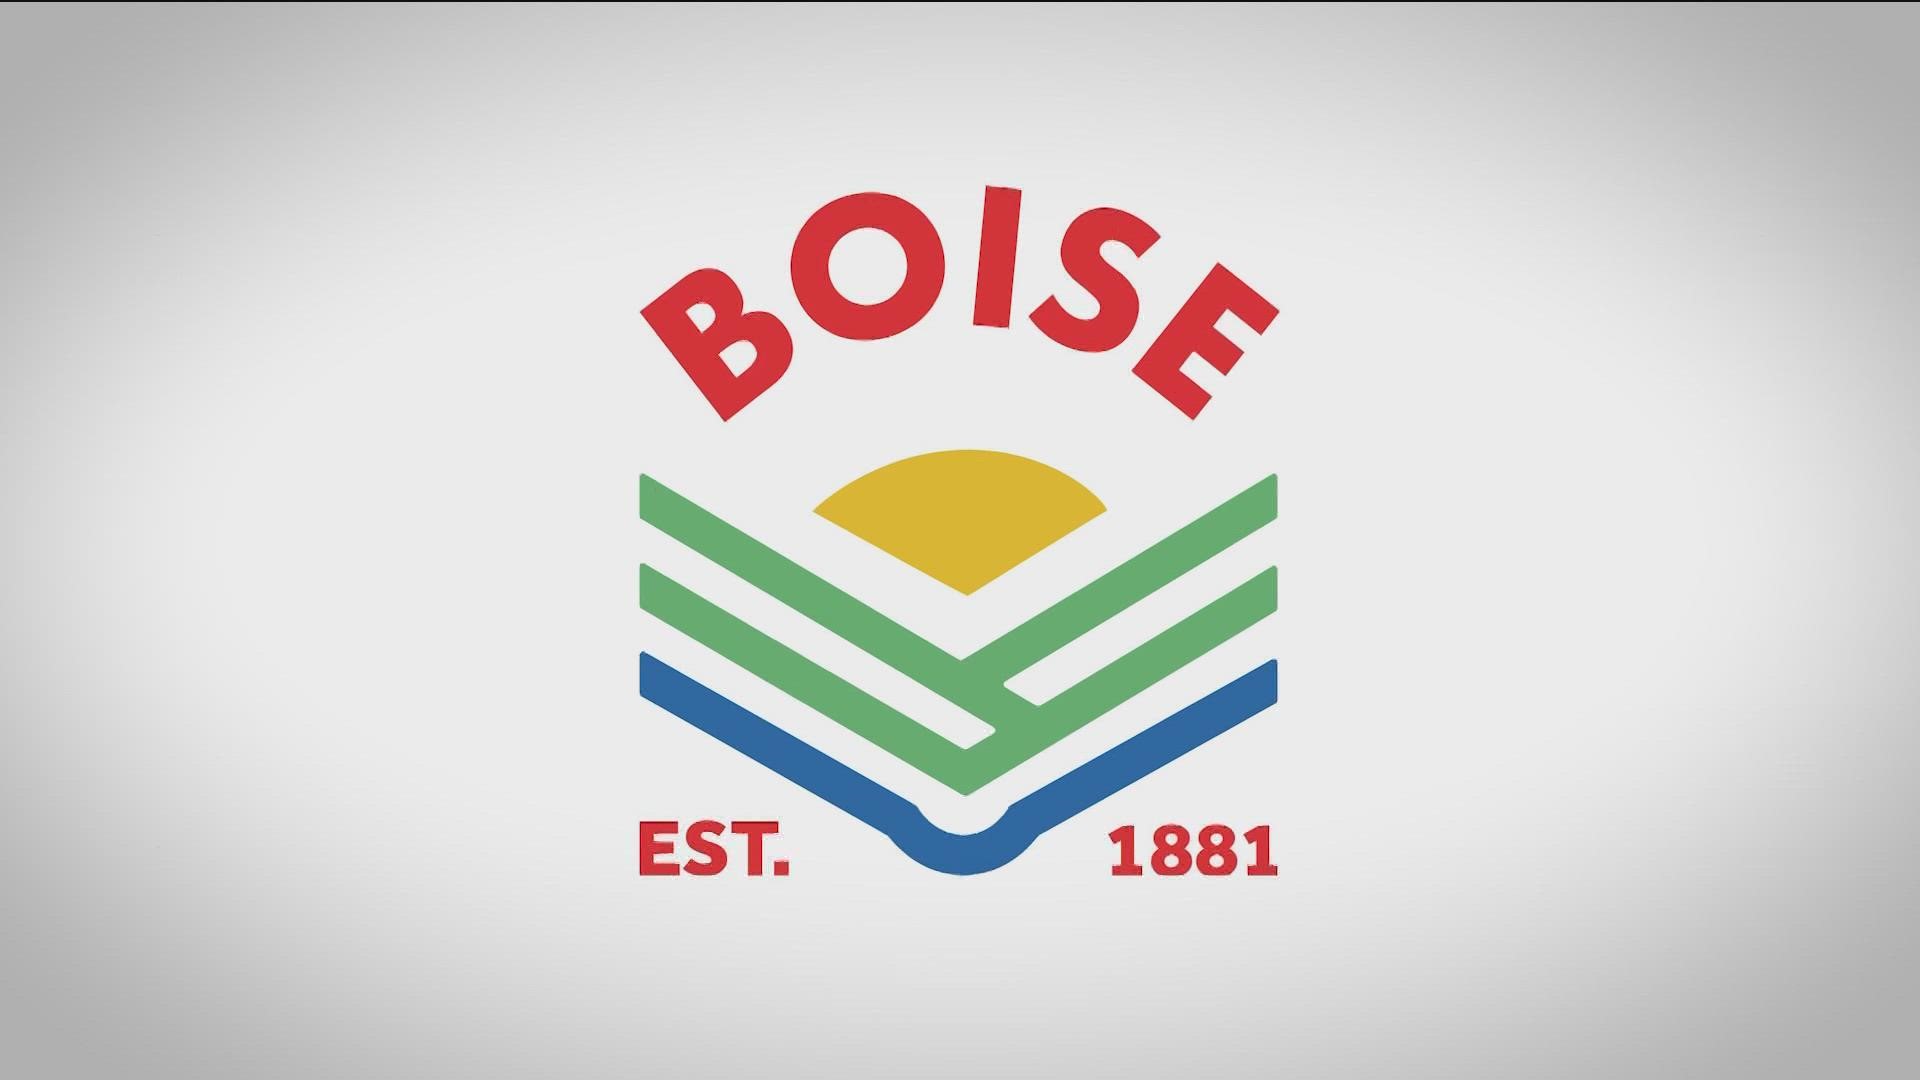 The new logo includes colors from Boise, Borah, Capital and Timberline high schools, with a design resembling a book and the sun over the Boise Foothills.